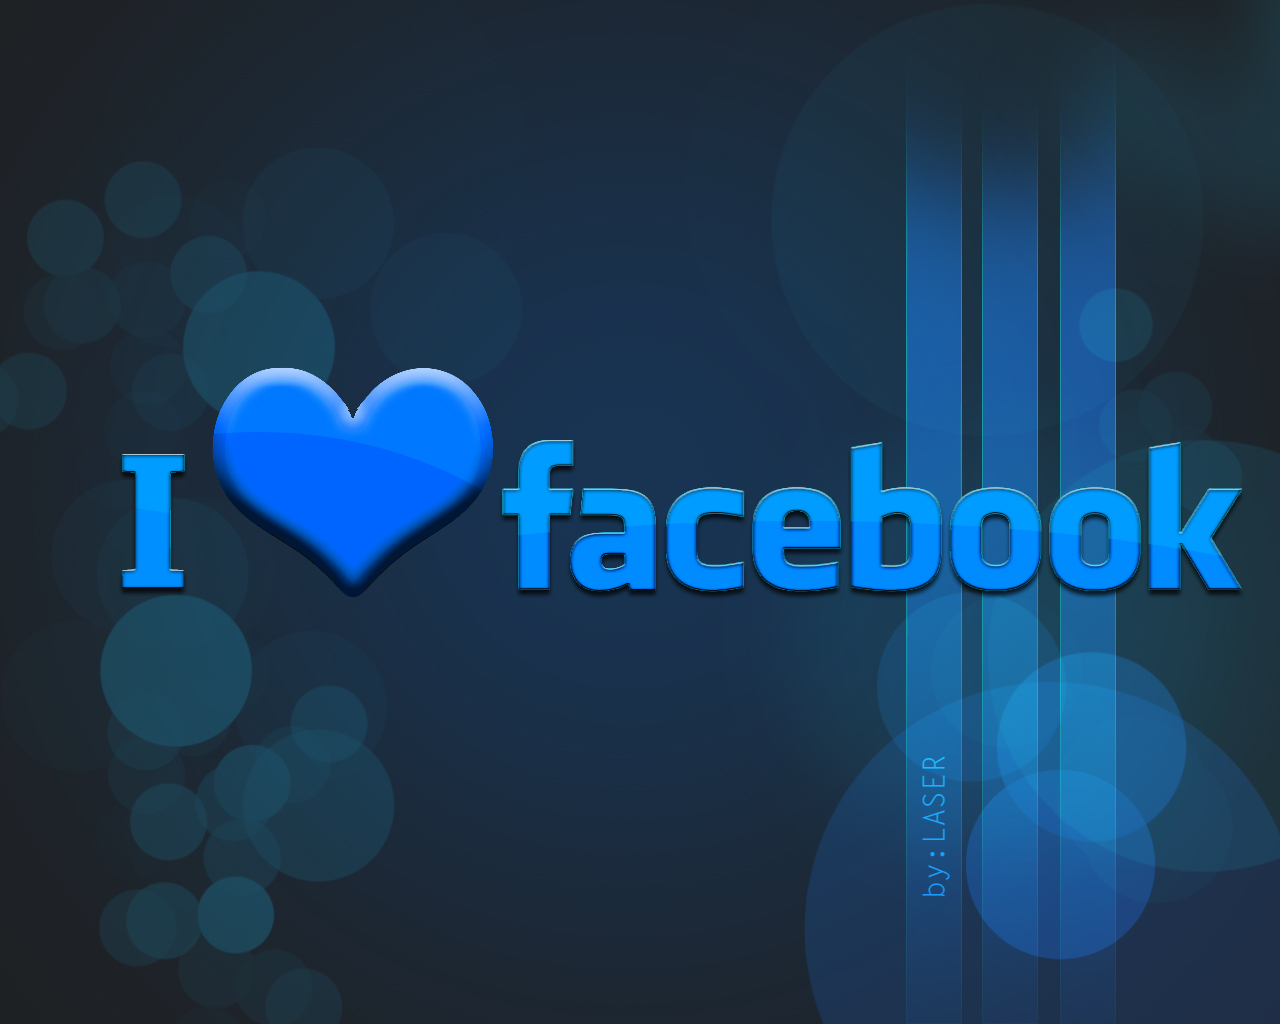  facebook wallpapers 4500 facebook wallpapers to choose from facebook